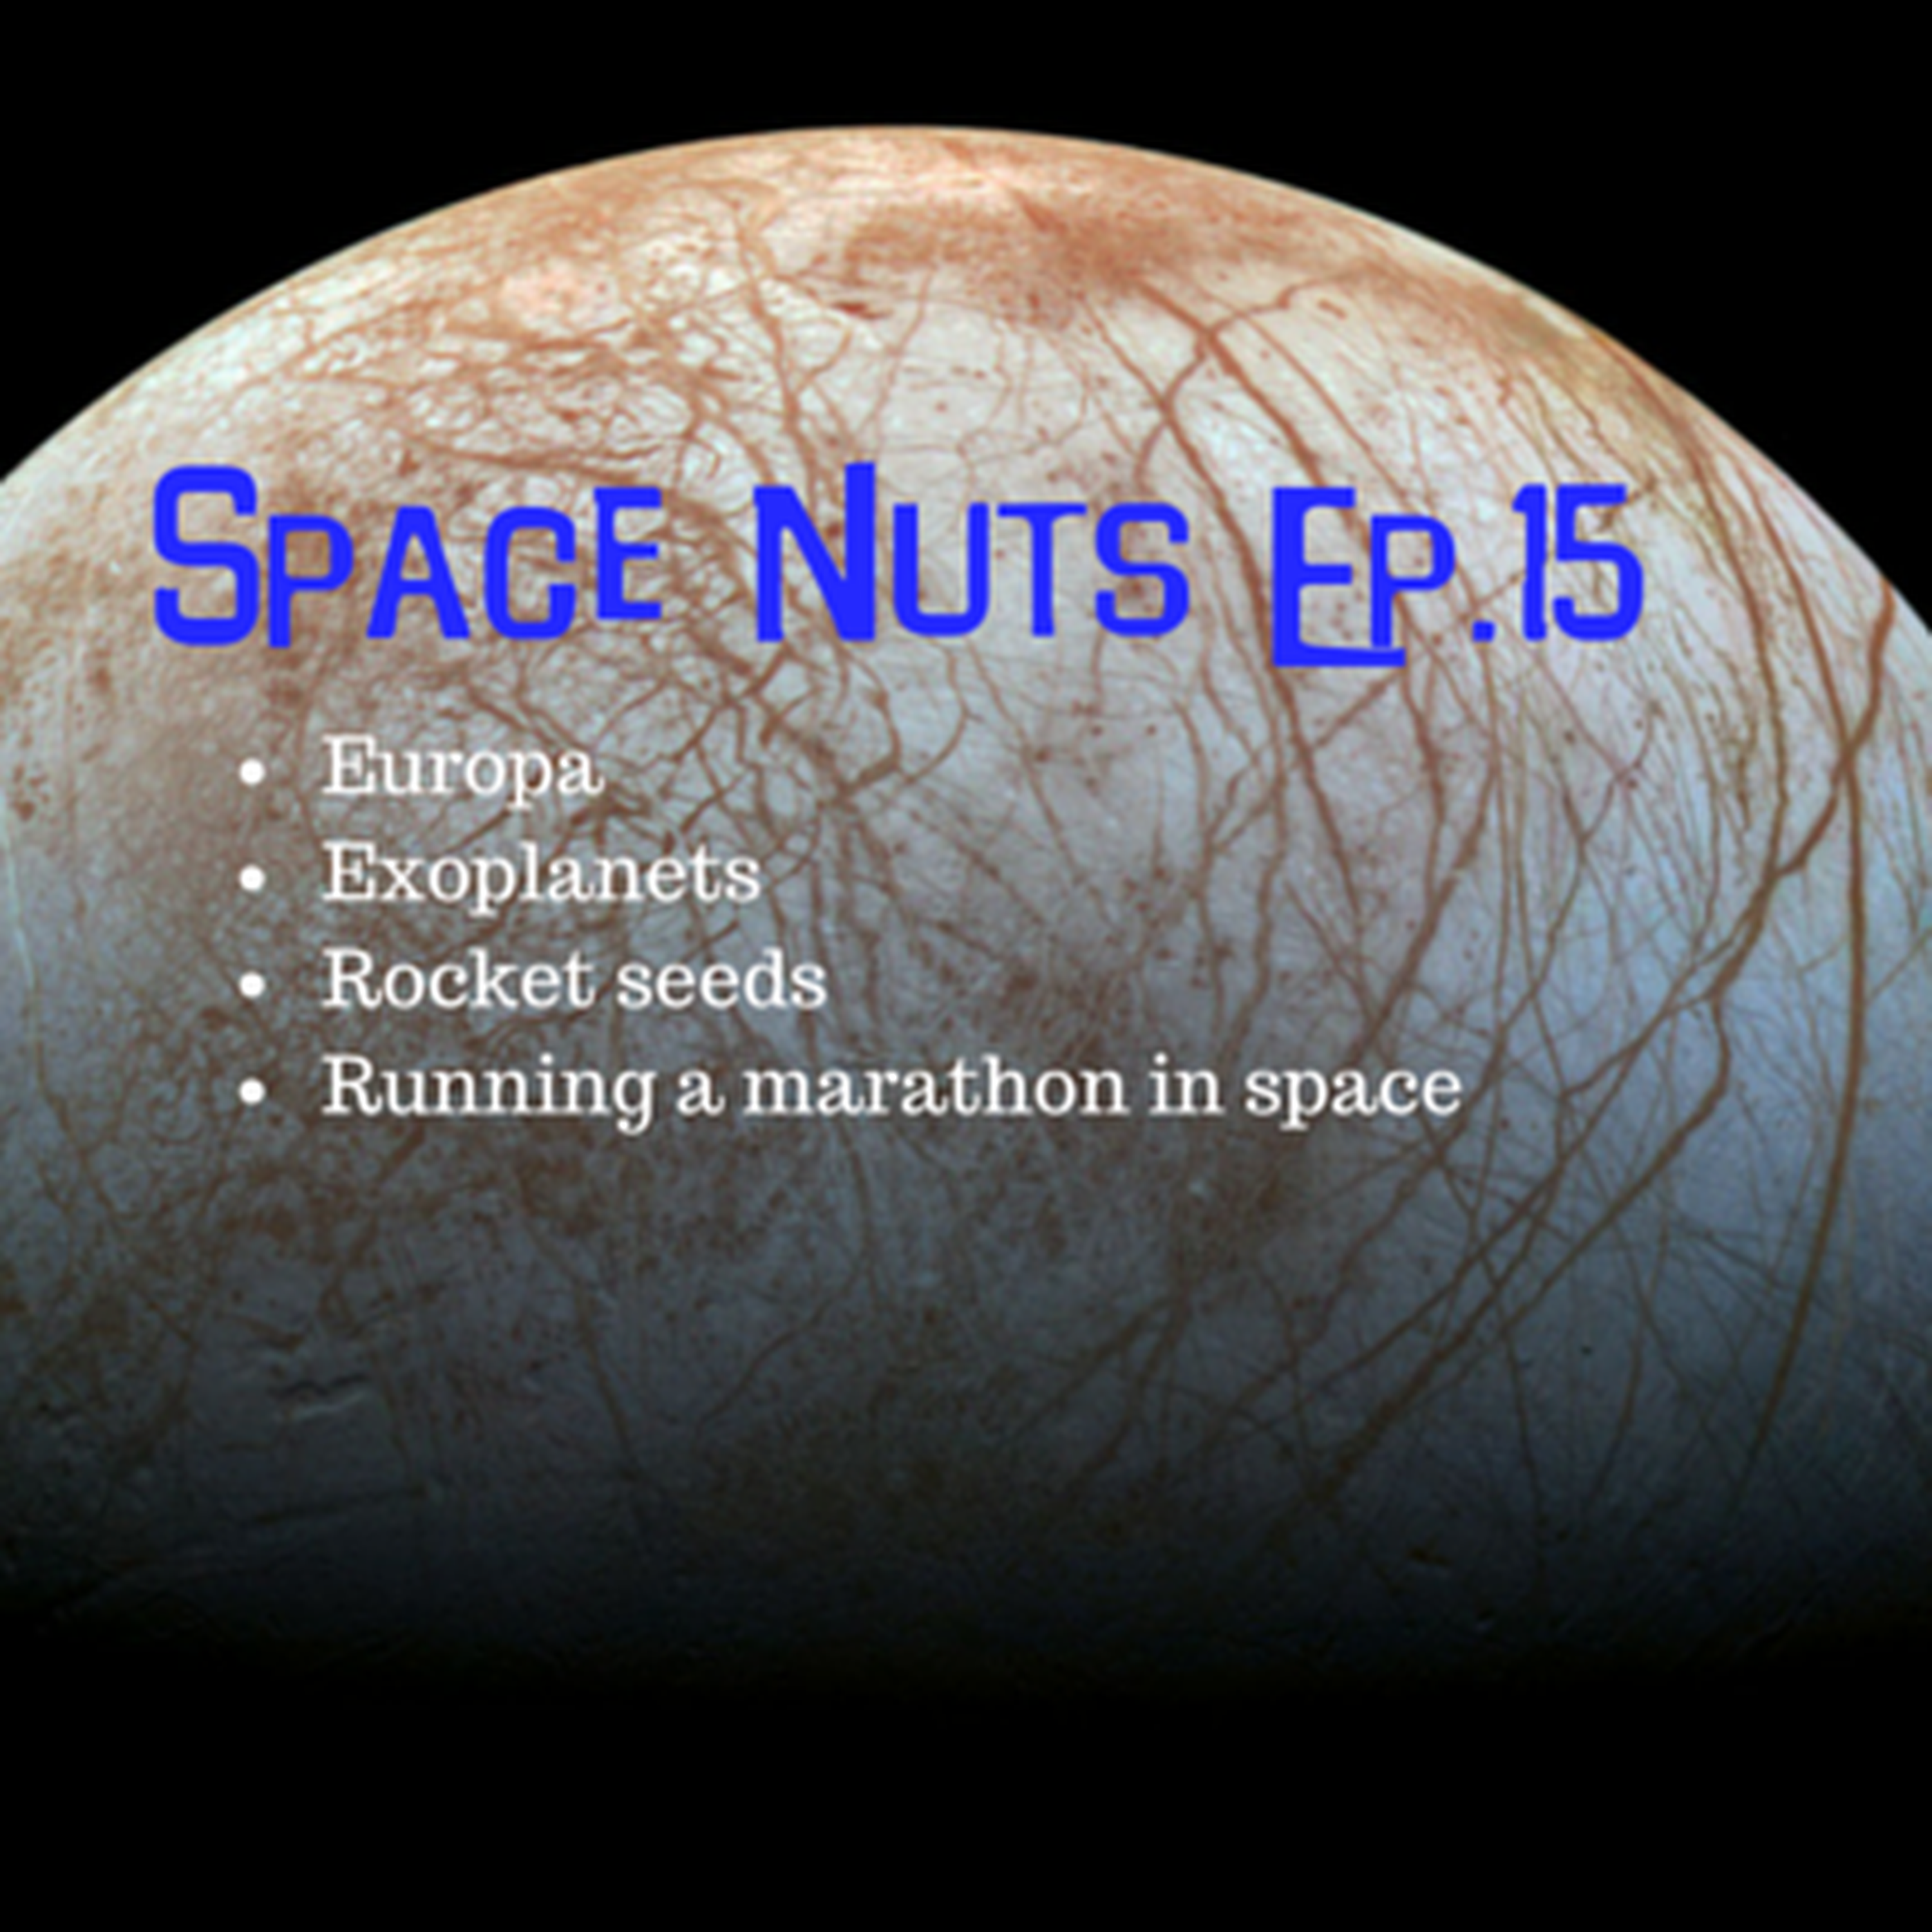 16: Space Nuts Episode 15 - Europa